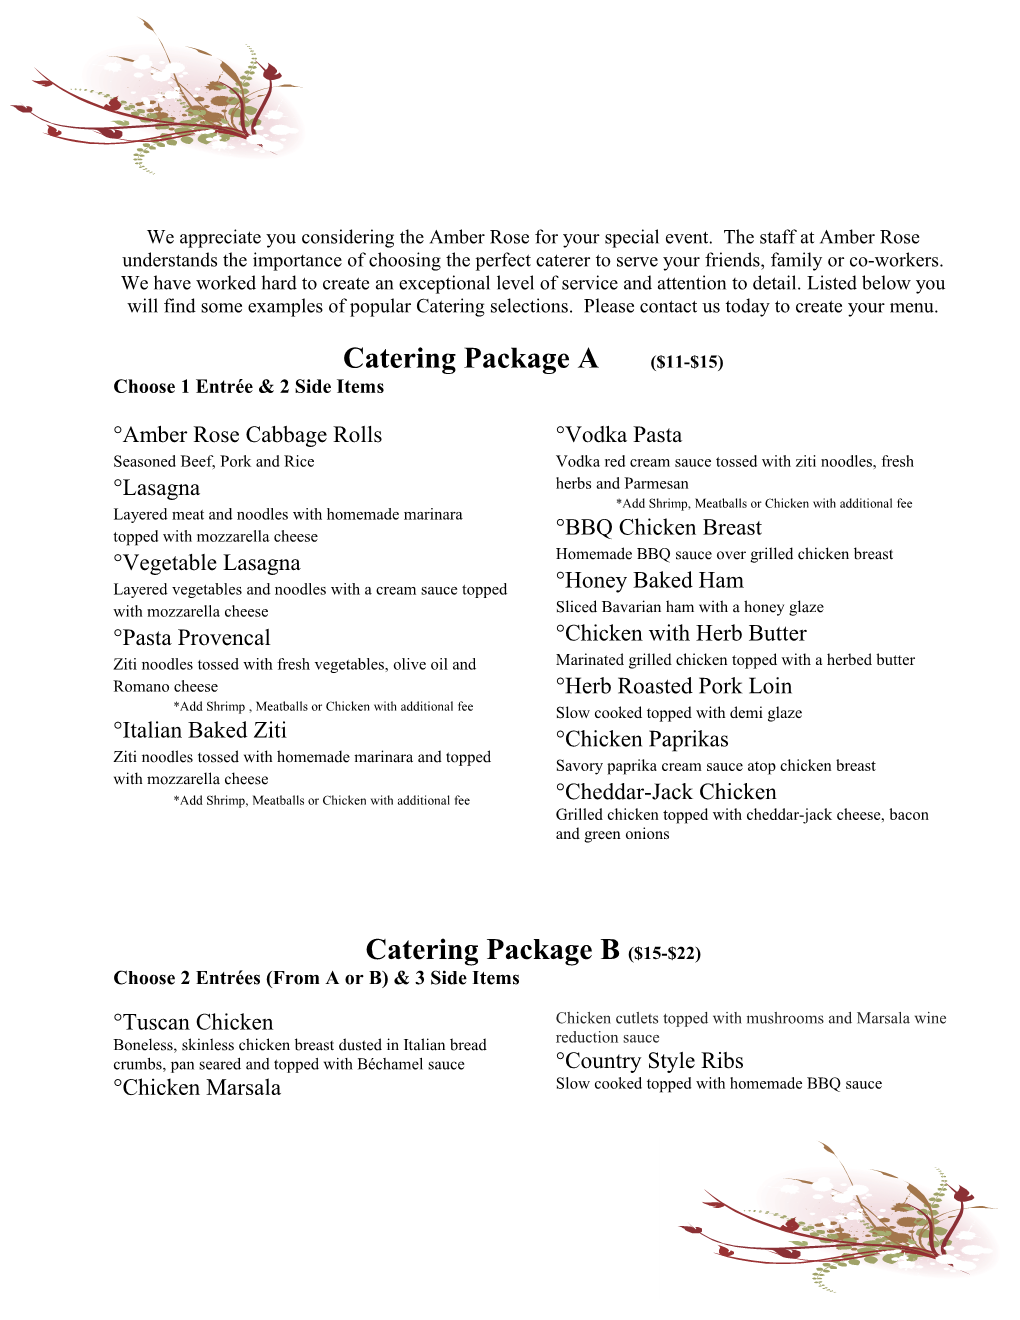 Catering Package a ($11-$15)